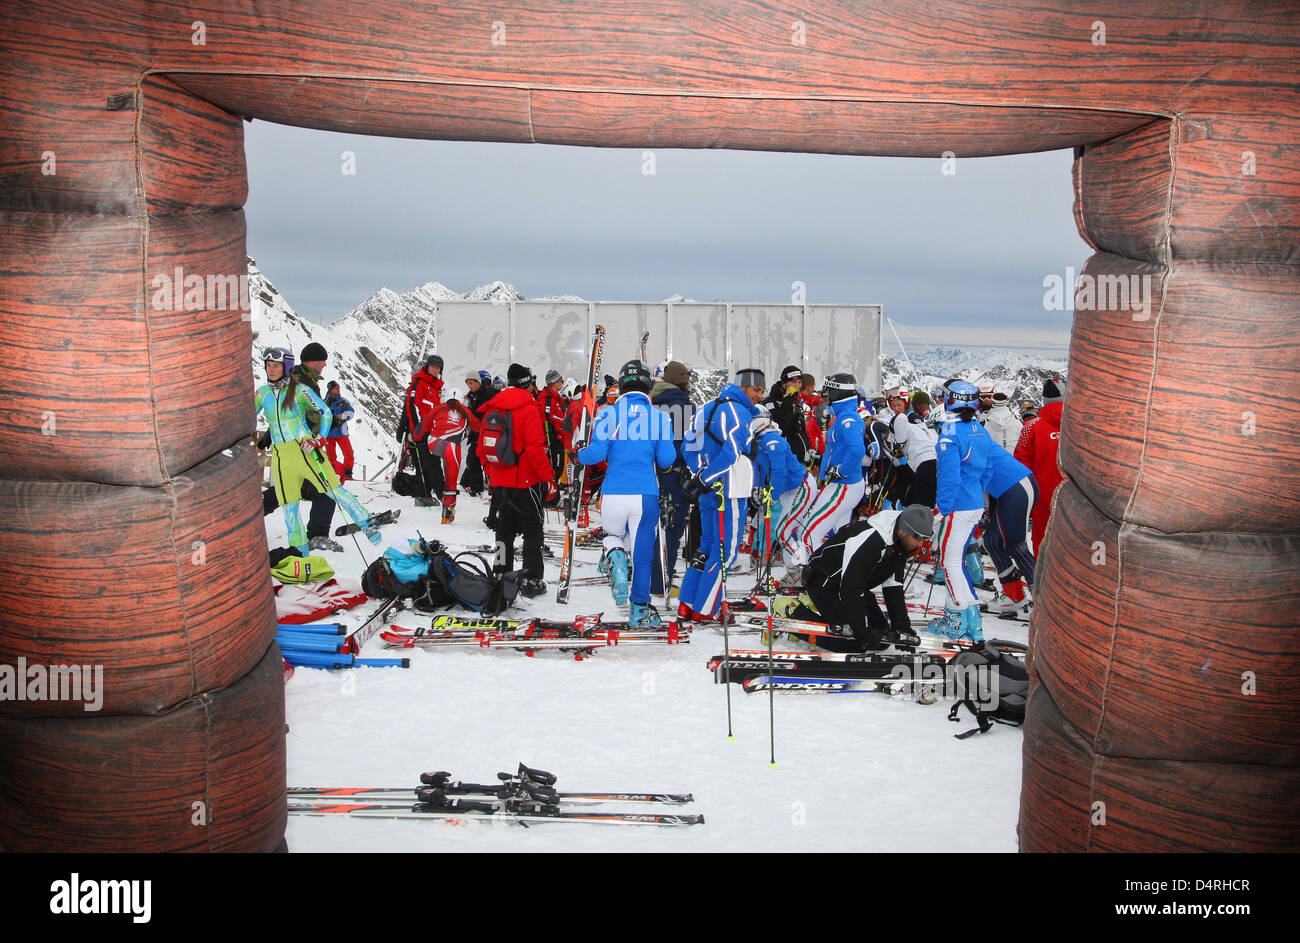 International skiers who wait for the start at a training session are pictured through the door of a blow-up hut on the Rettenbach glacier near Soelden, Austria, 23 October 2009. Soelden hosts Giant Slaloms on 24 and 25 October that kick off the Alpine Skiing world cup season 2009/10. Photo: KARL-JOSEF HILDENBRAND Stock Photo